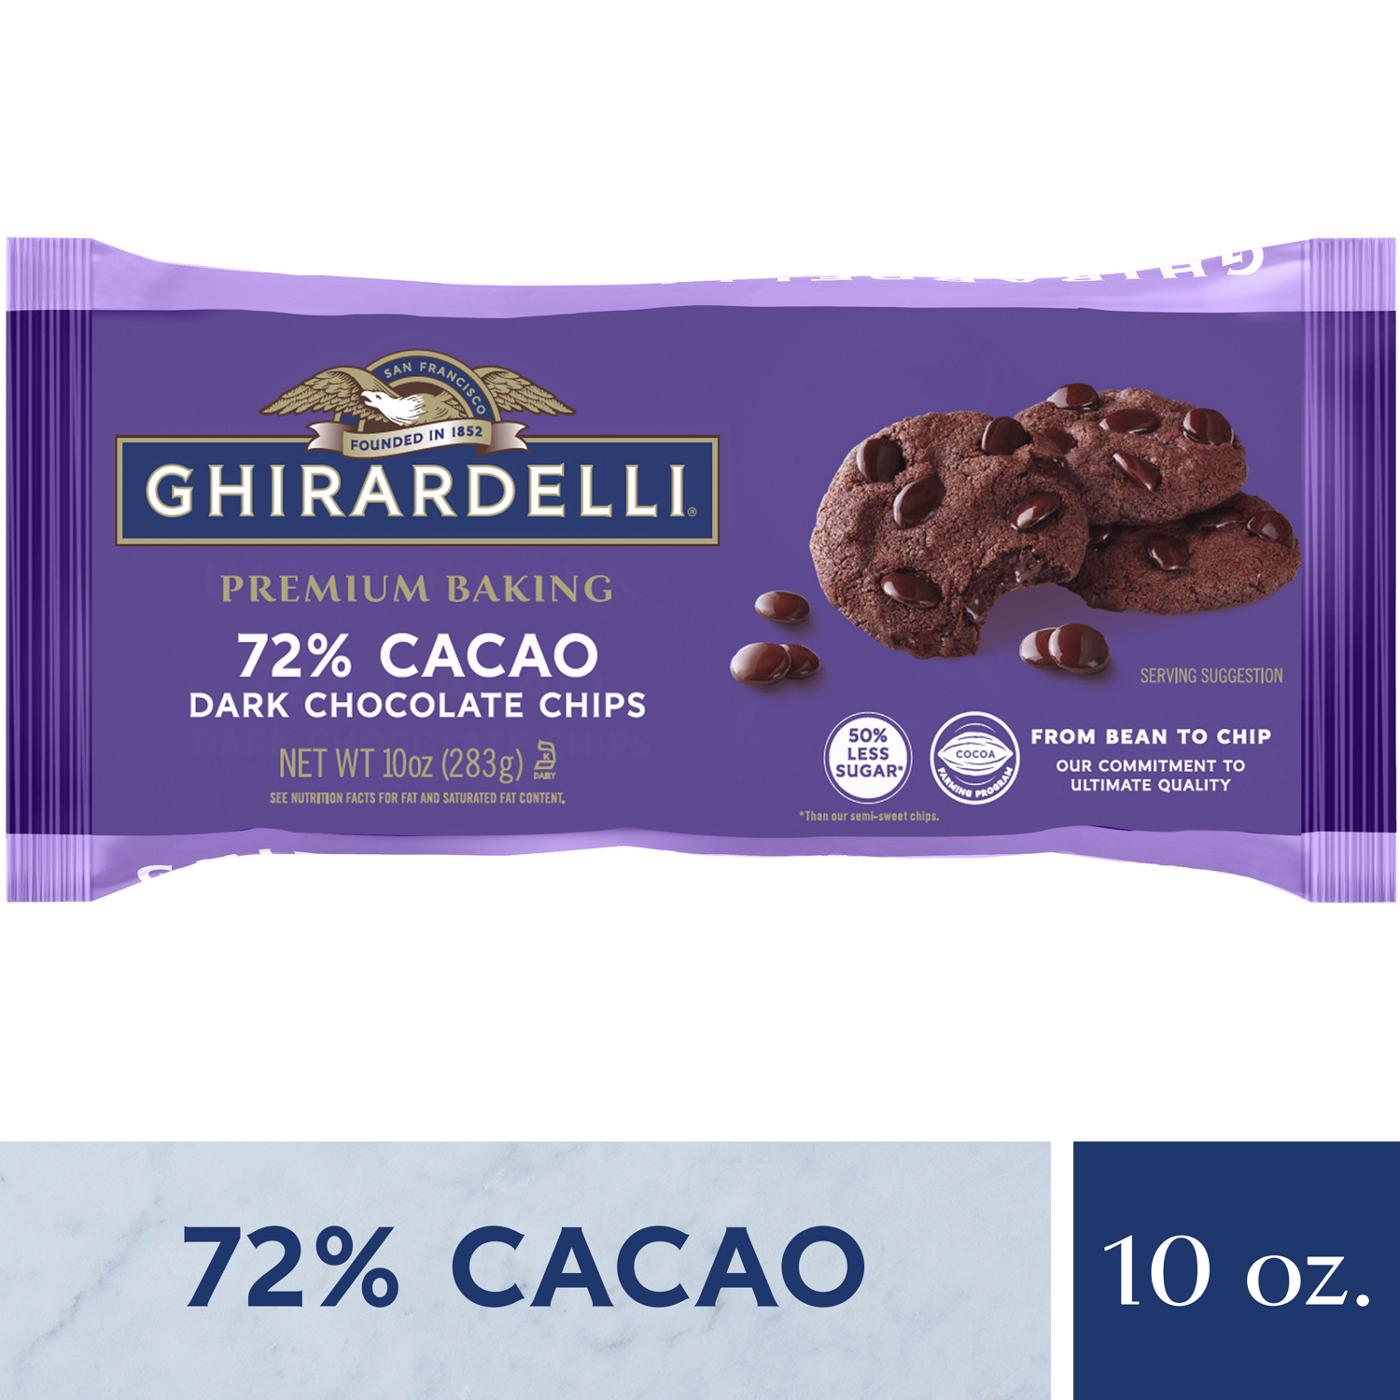 Ghirardelli 72% Cacao Dark Chocolate Premium Baking Chips, Chocolate Chips for Baking; image 6 of 7